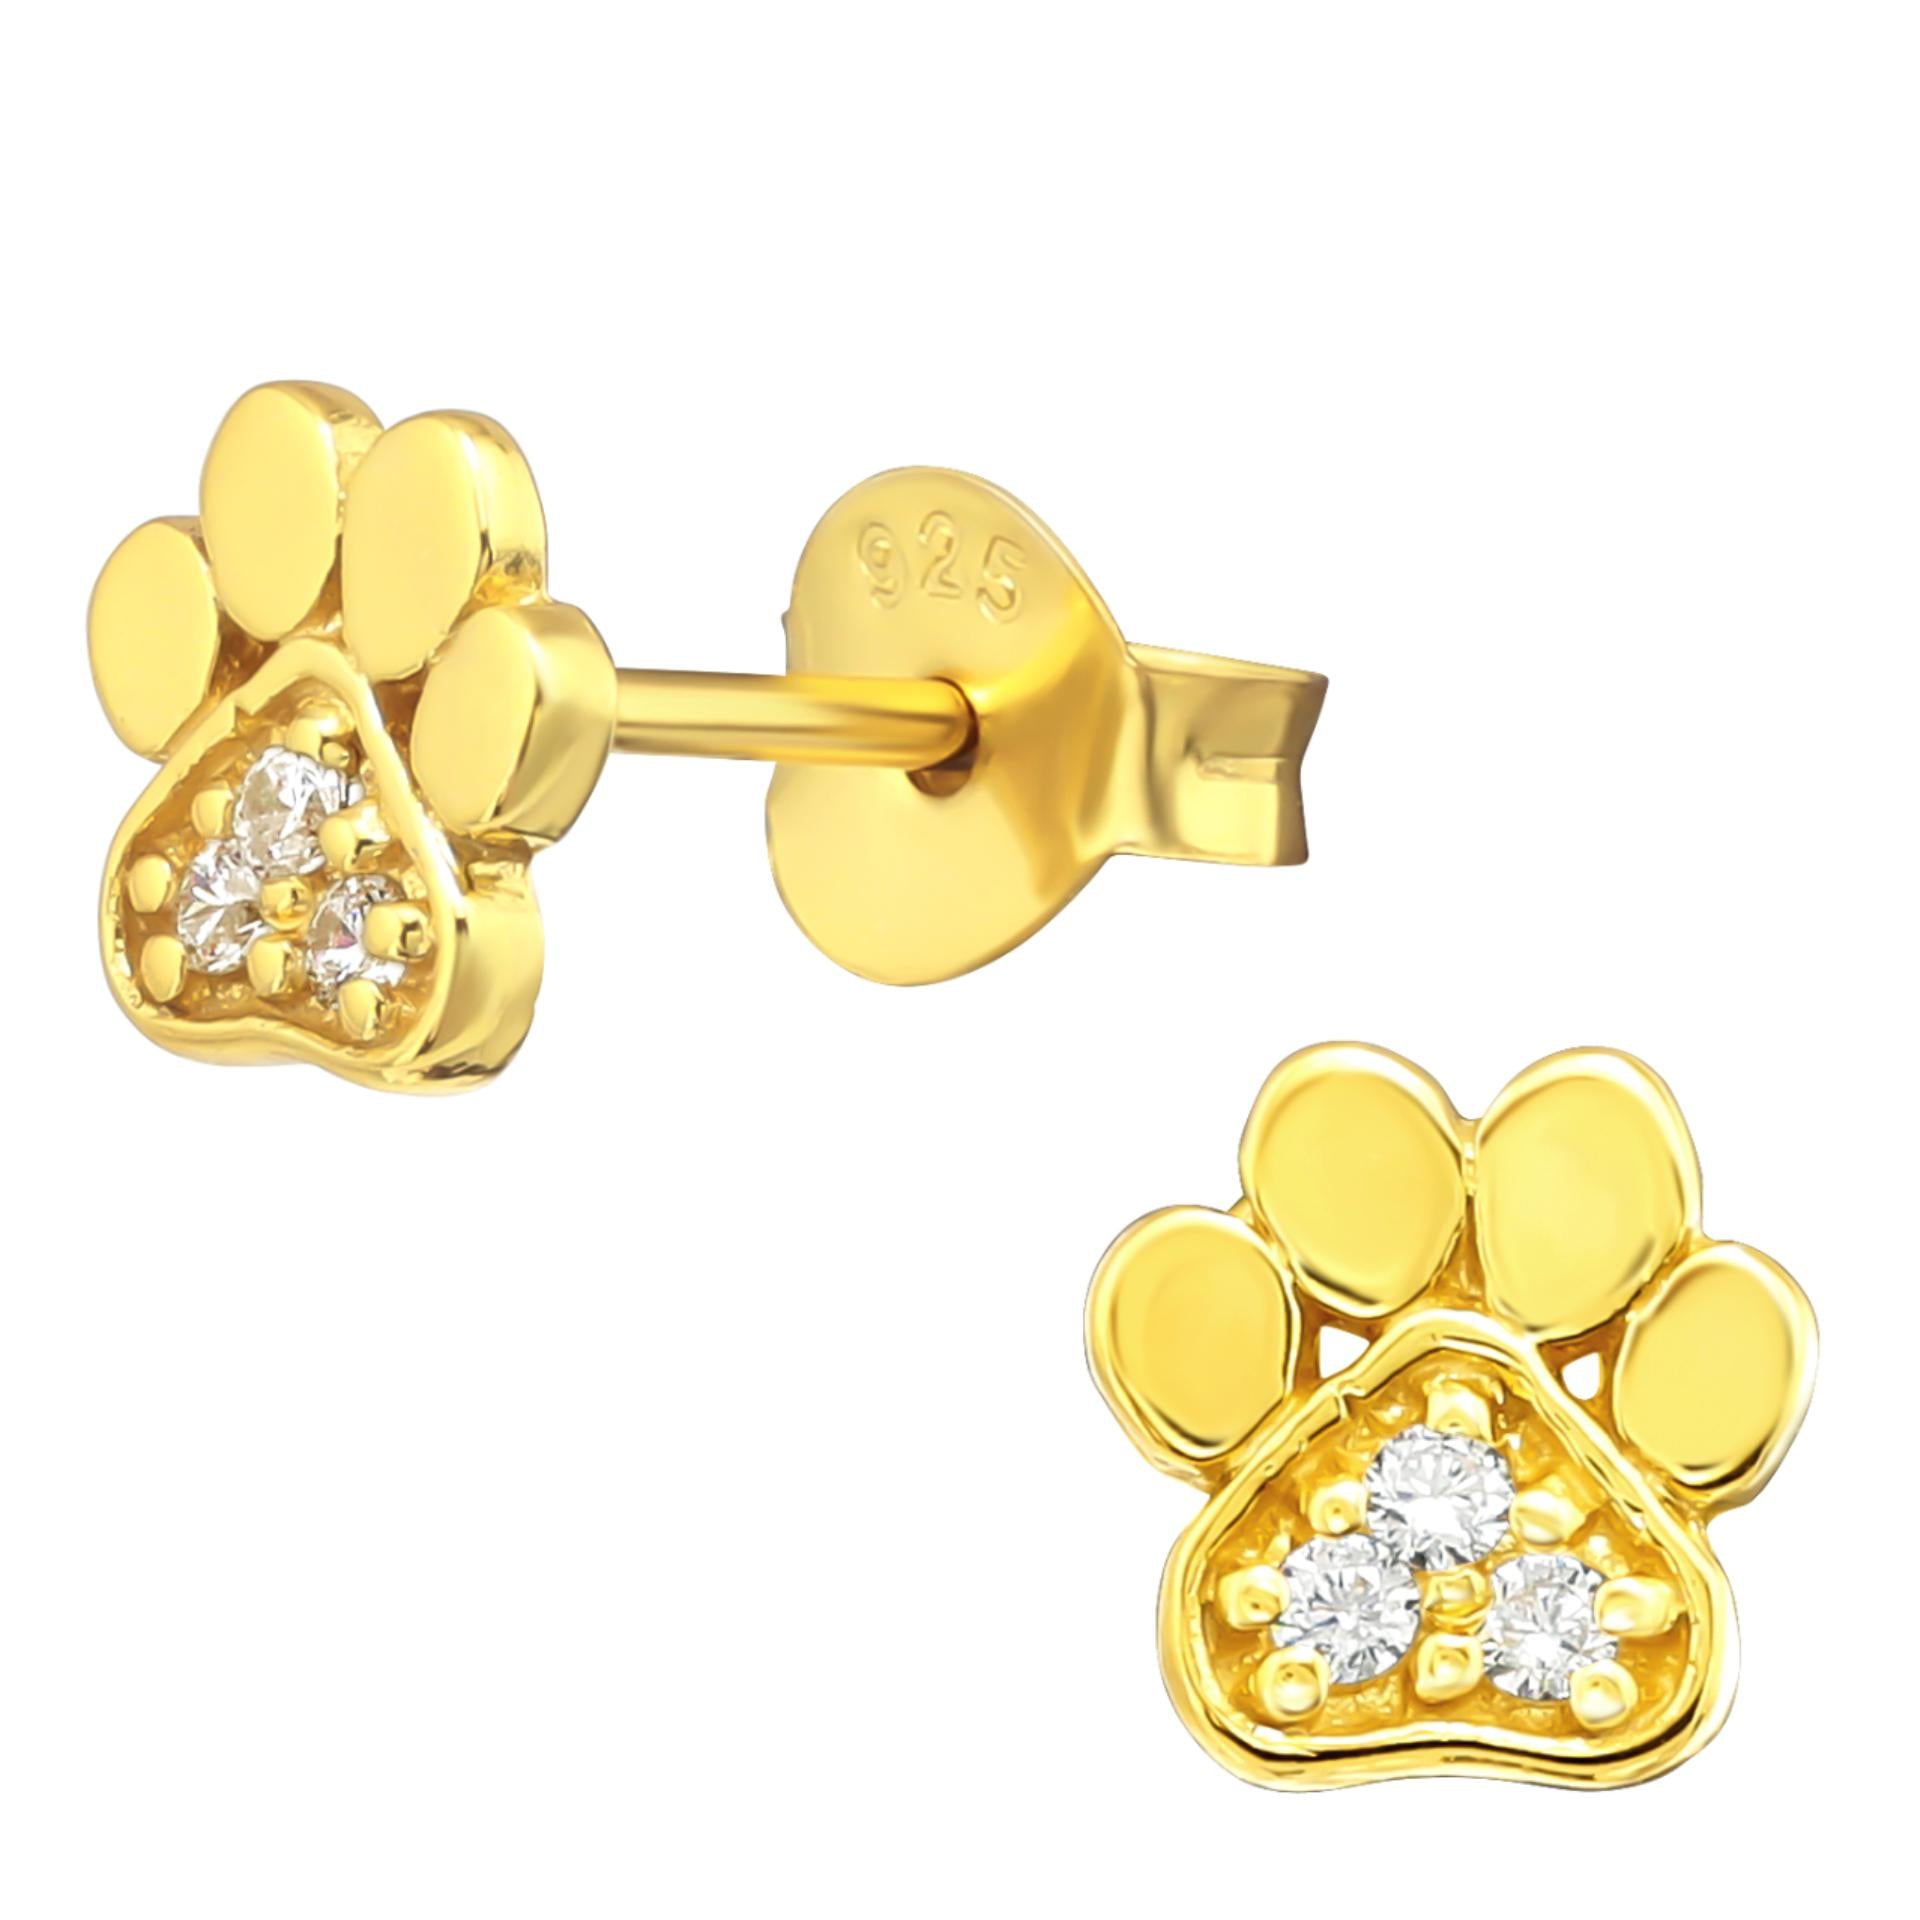 24k Gold Plated Sterling Silver Paw Stone Stud Earrings